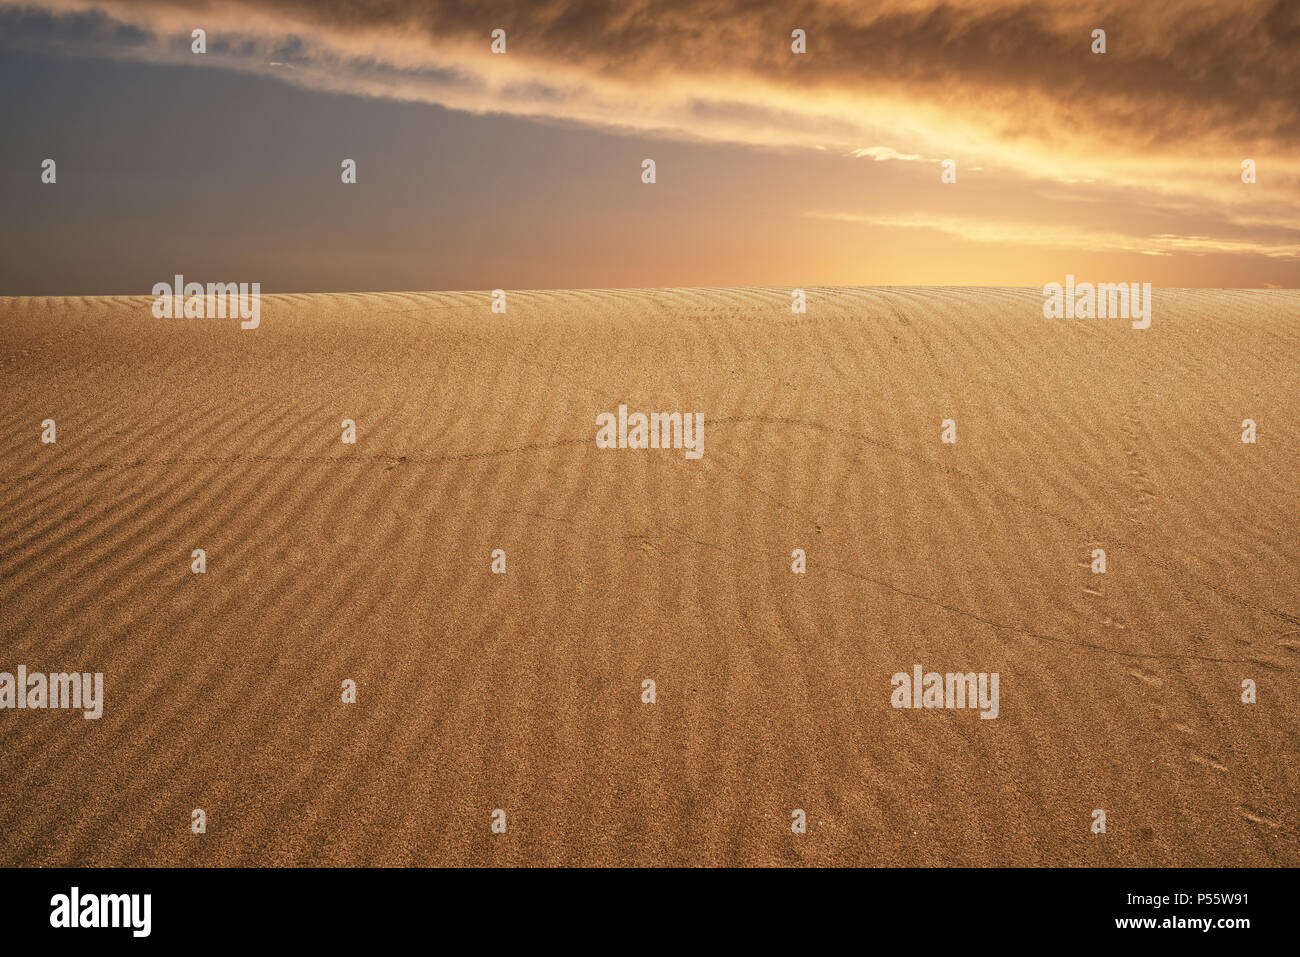 Global warming concept. Lonely sand dunes under dramatic evening sunset sky at drought desert landscape. Stock Photo